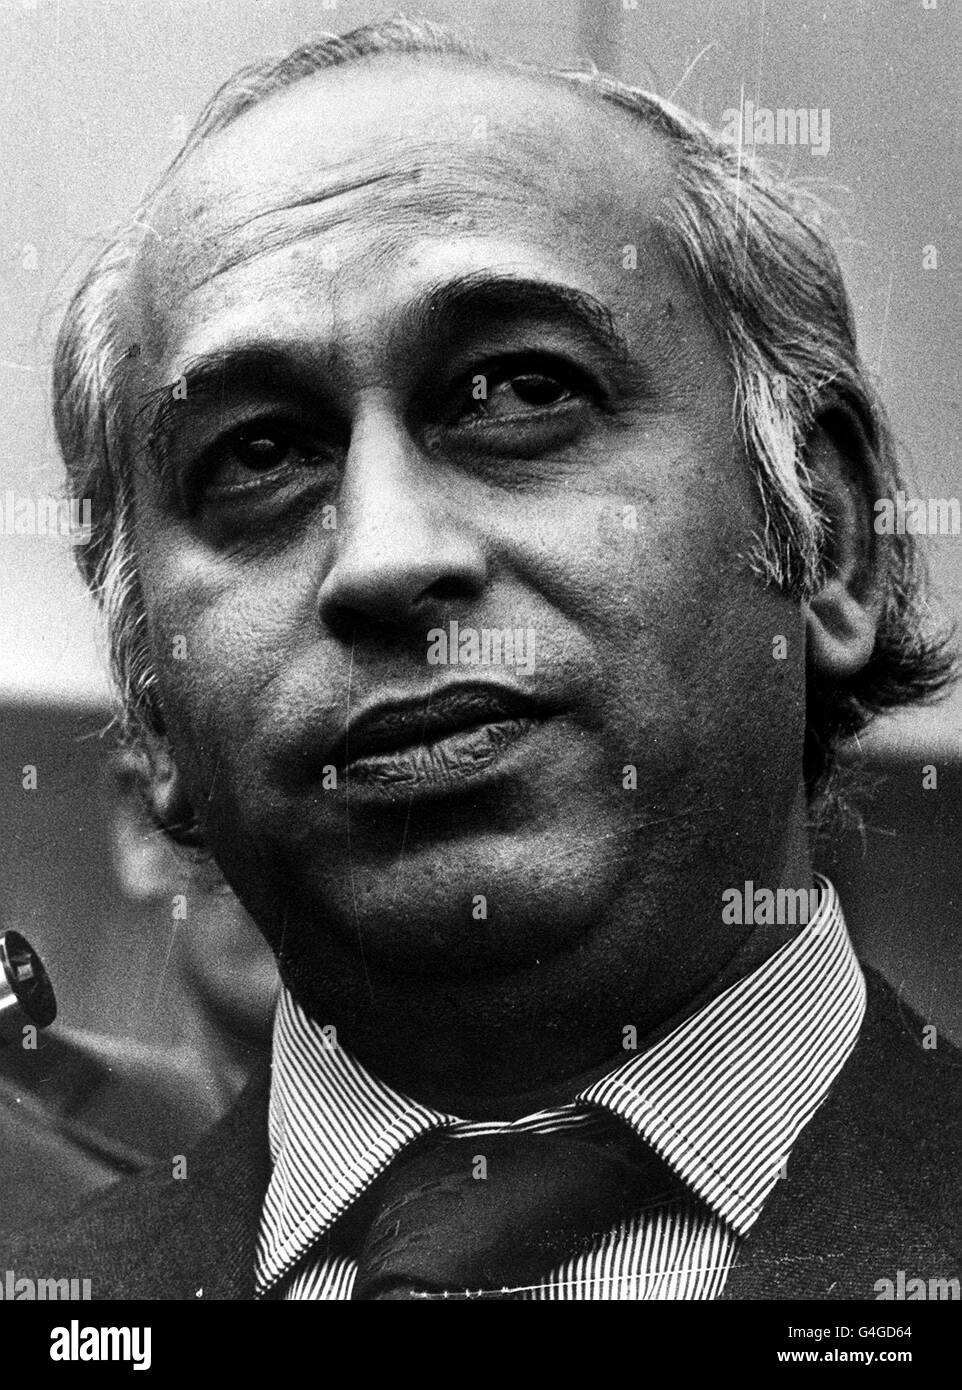 APRIL 4th: On this day in 1979, the President of Pakistan, Zulfikar Ali Bhutto, was executed. Ali Bhutto was sentenced to death for the murder of a political opponent following a trial which was widely condemned as unfair. The appeal process was also tainted by allegations of bias on the part of some judges. PA NEWS PHOTO 23/4/77 A LIBRARY PORTRAIT OF ZULFIKA ALI BHUTTO Stock Photo